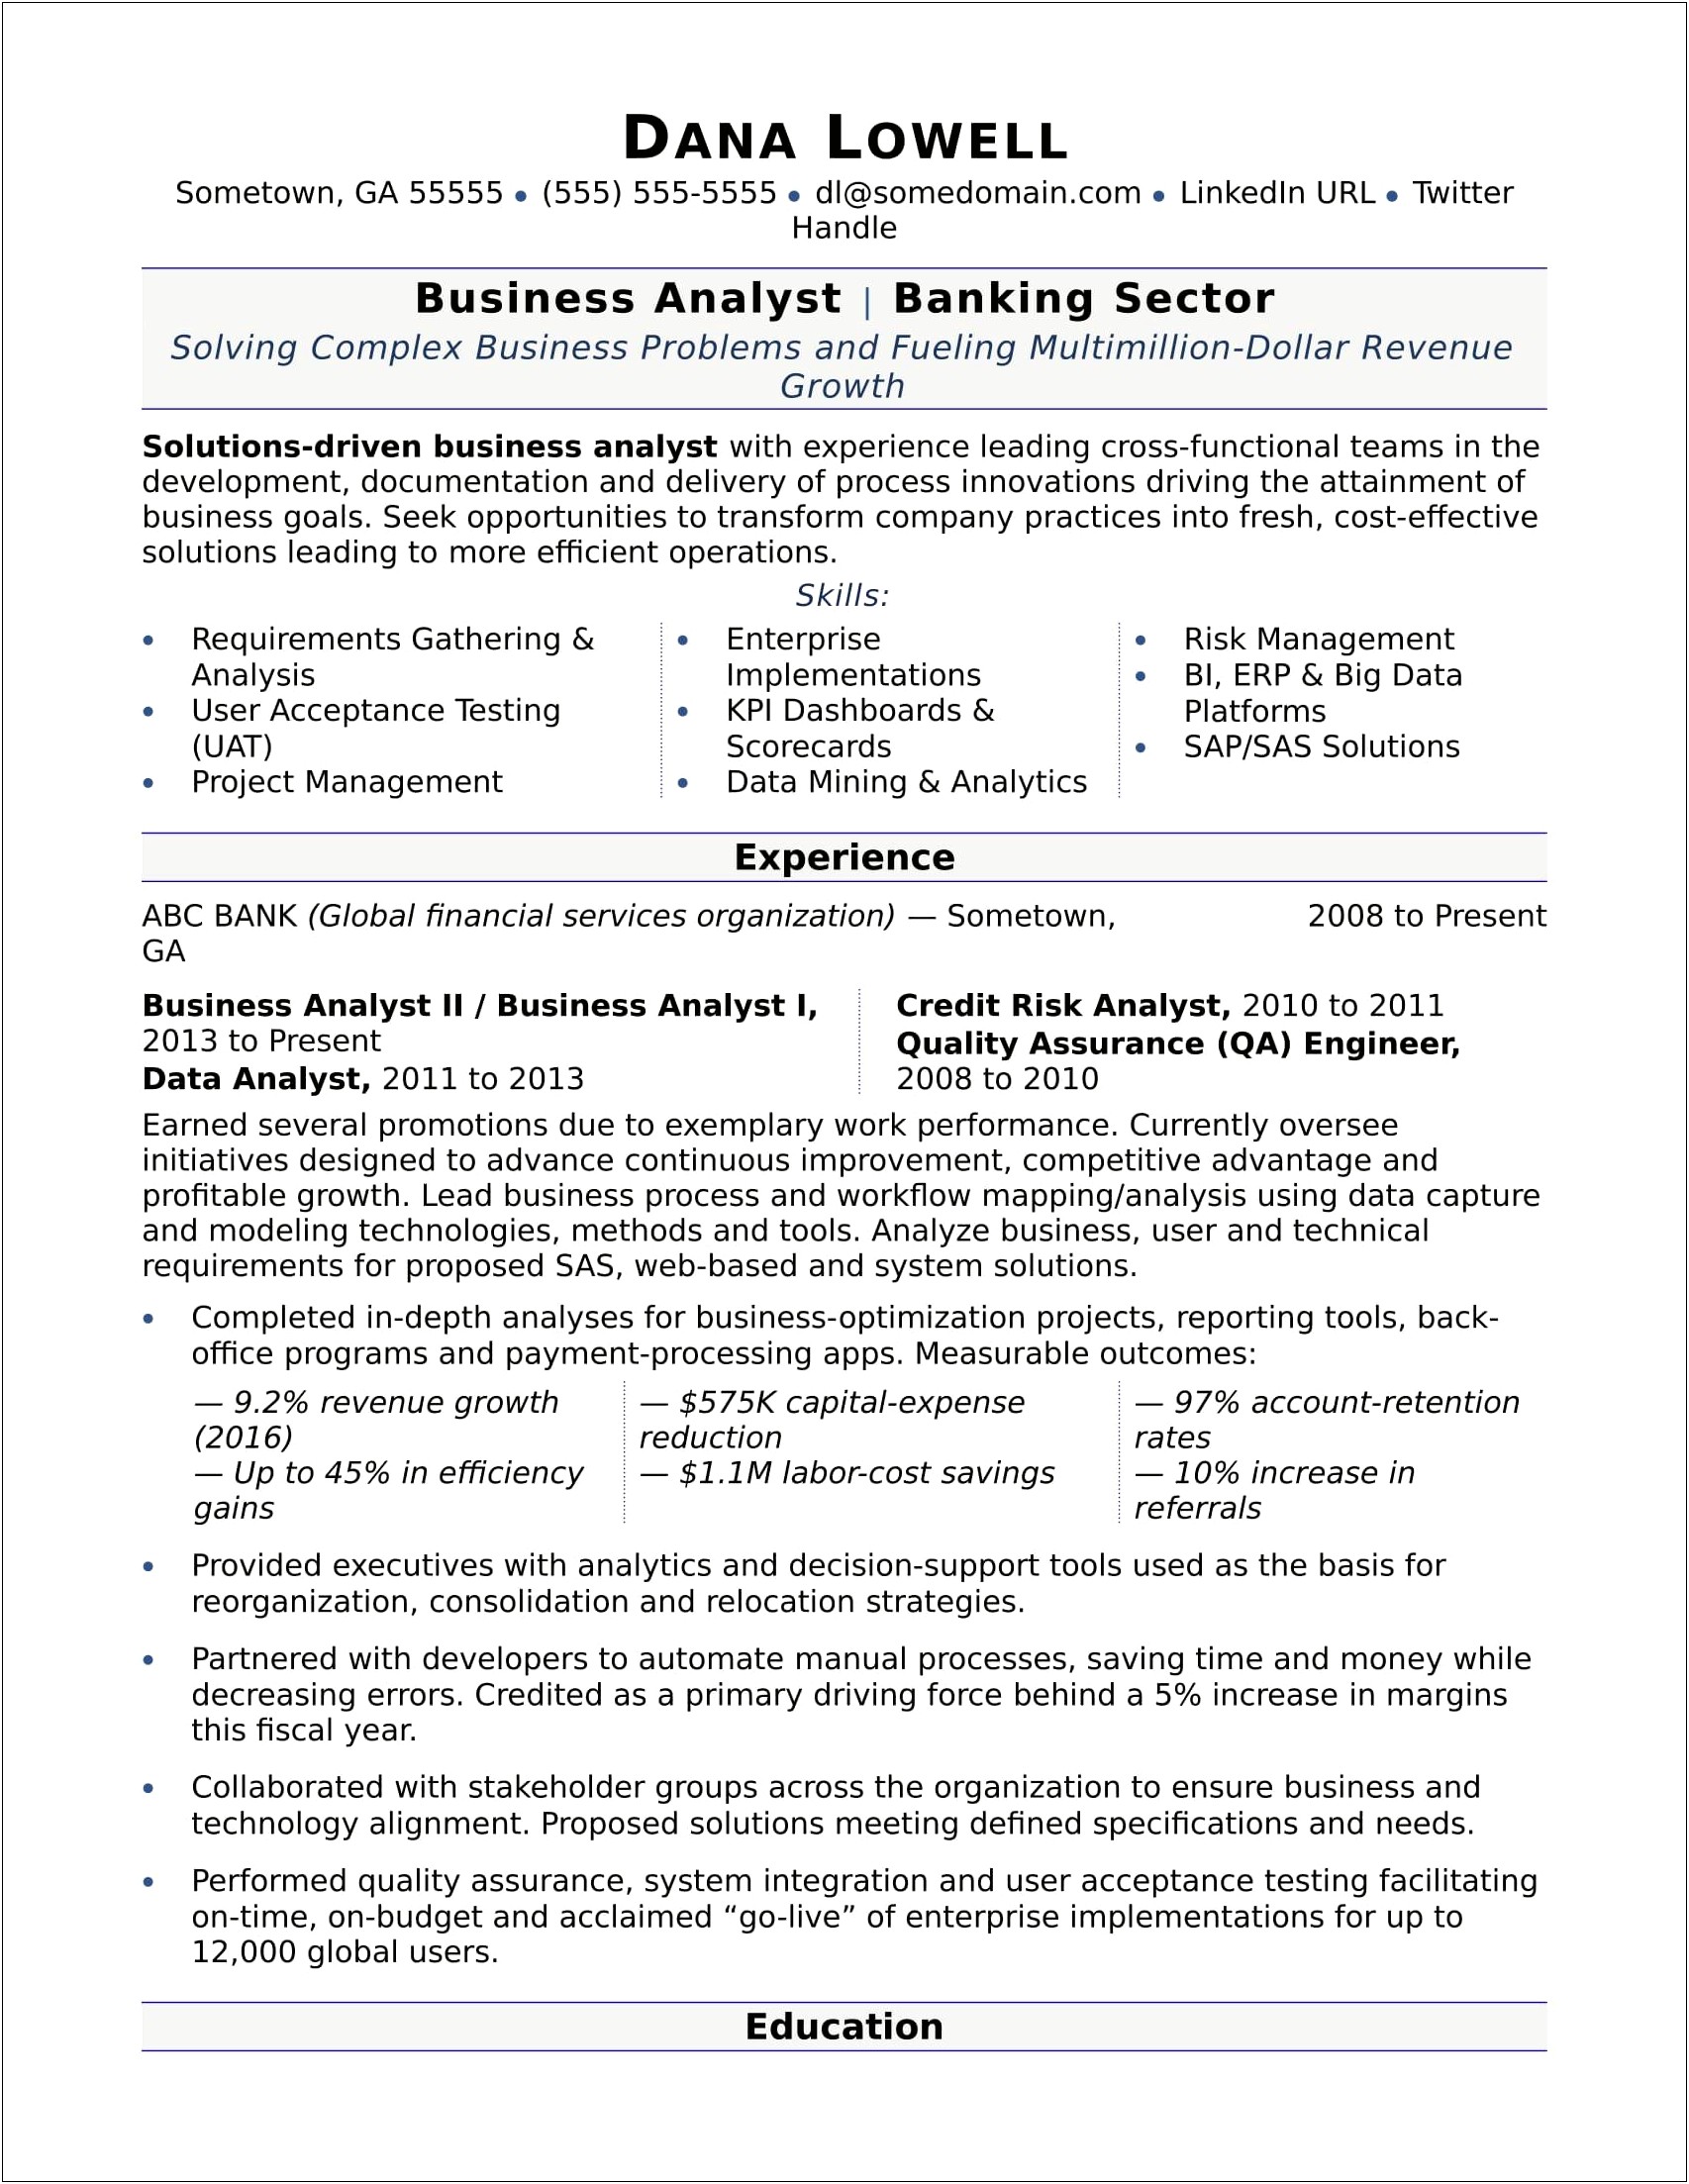 Masters Of Business Administration Professional Summary Resume